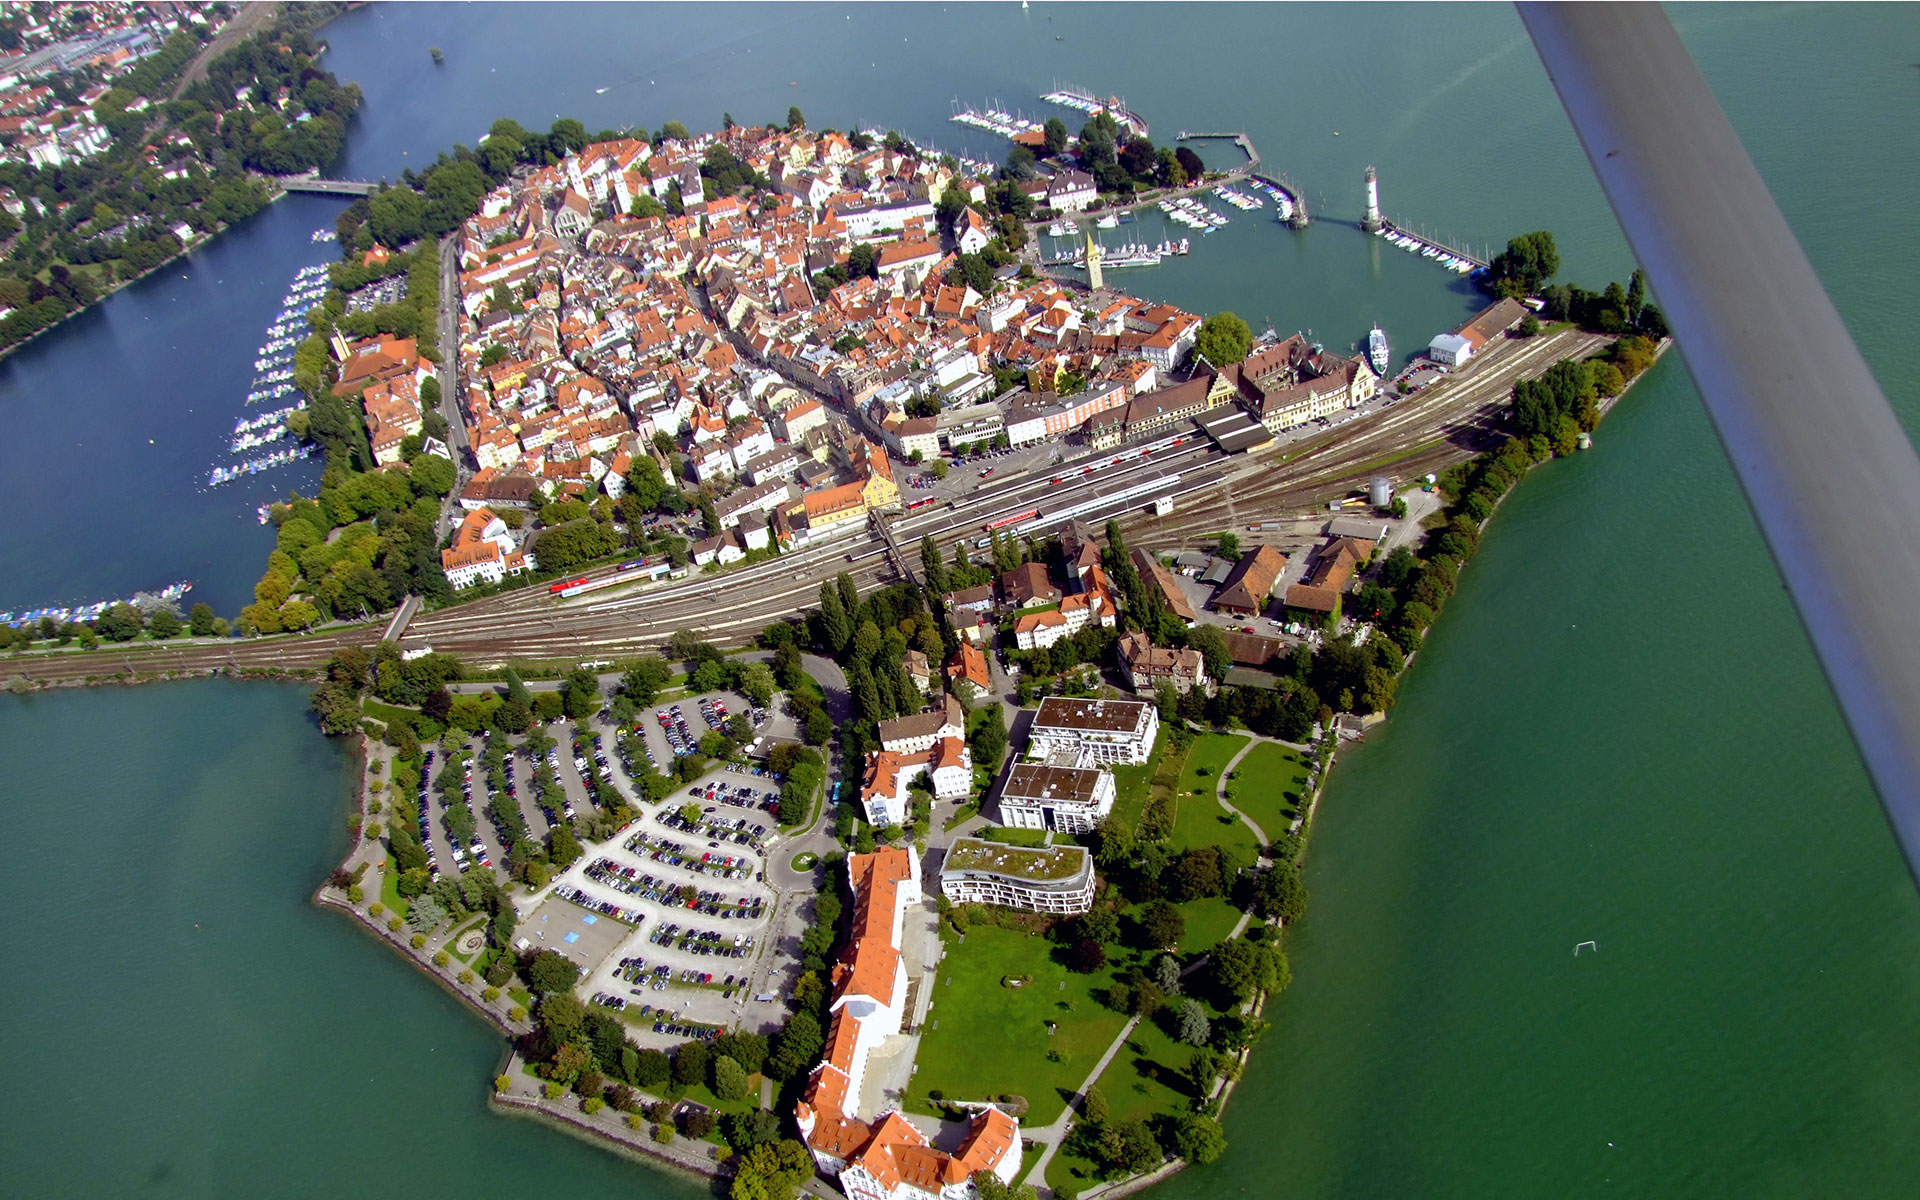 Aerial view of Lindau Island in Lake Constance - where the town's station (Hauptbahnhof) and railway lines take up much space. A new mainland station. more convenient for most Lindau residents, will open in December 2020 (photo © Potteret / dreamstime.com).